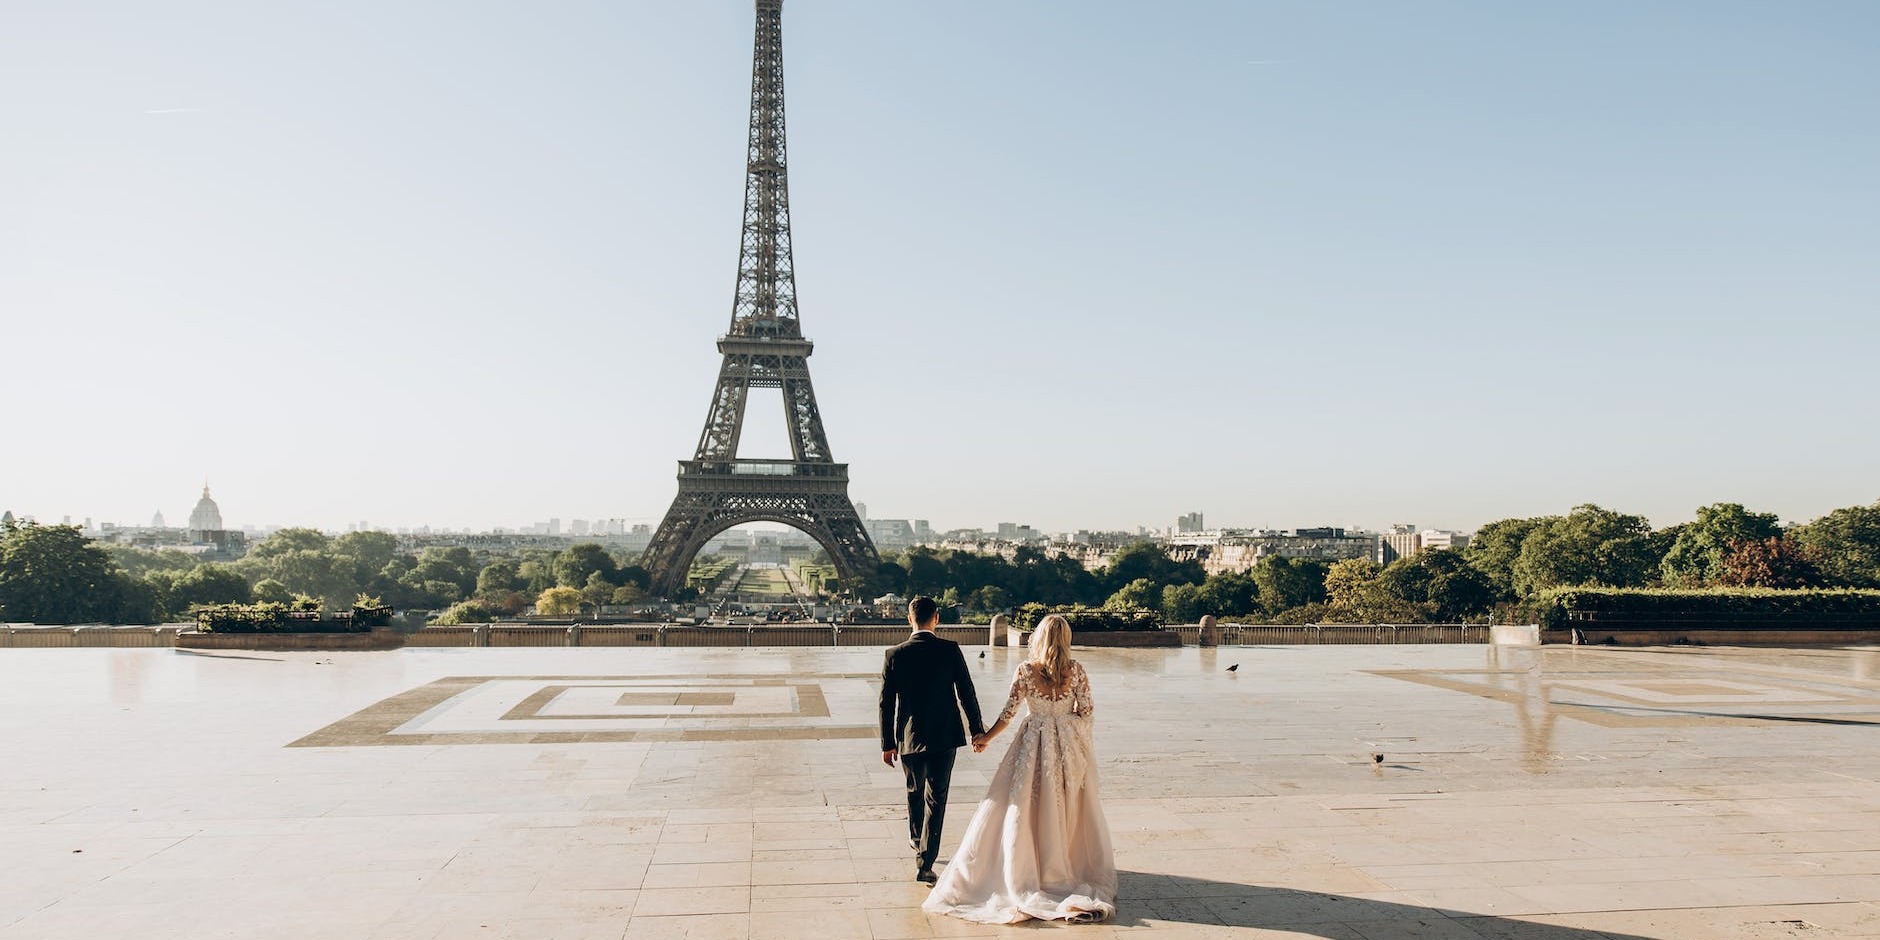 The Top Trends in Destination Weddings for 2023: What to Expect in the UK